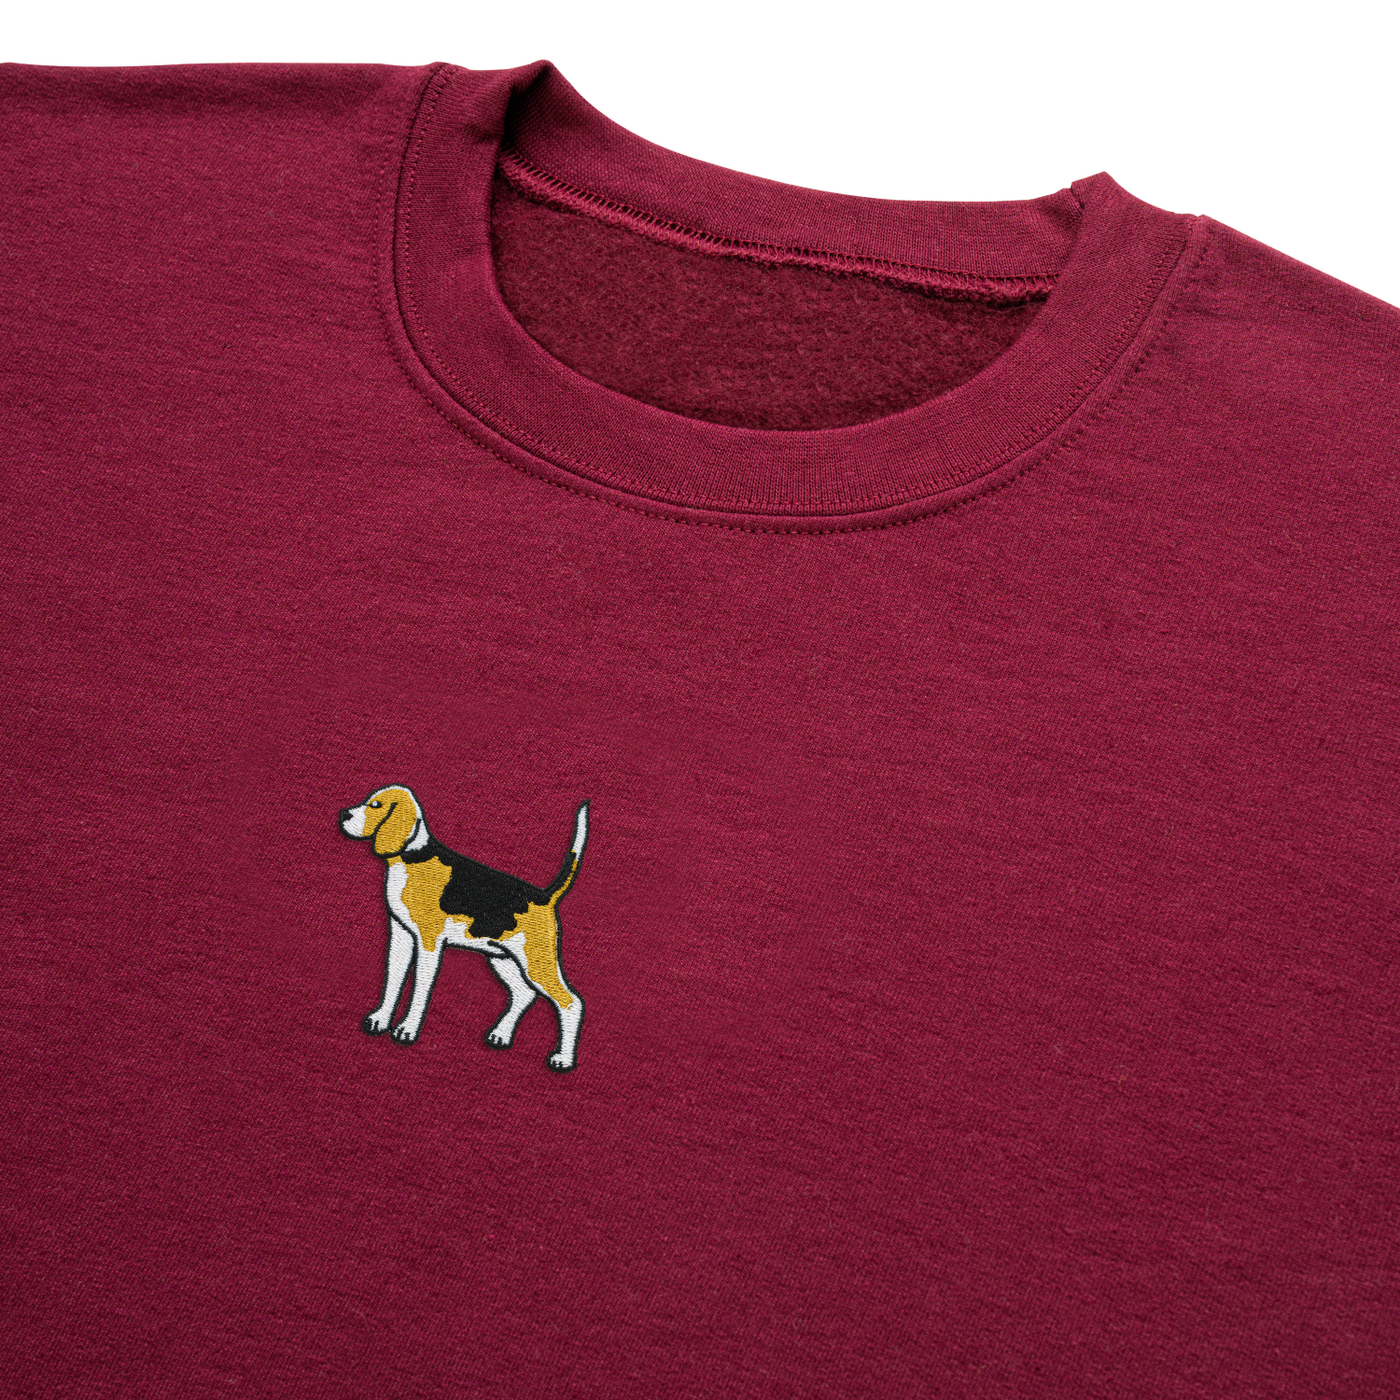 Bobby's Planet Men's Embroidered Beagle Sweatshirt from Paws Dog Cat Animals Collection in Maroon Color#color_maroon